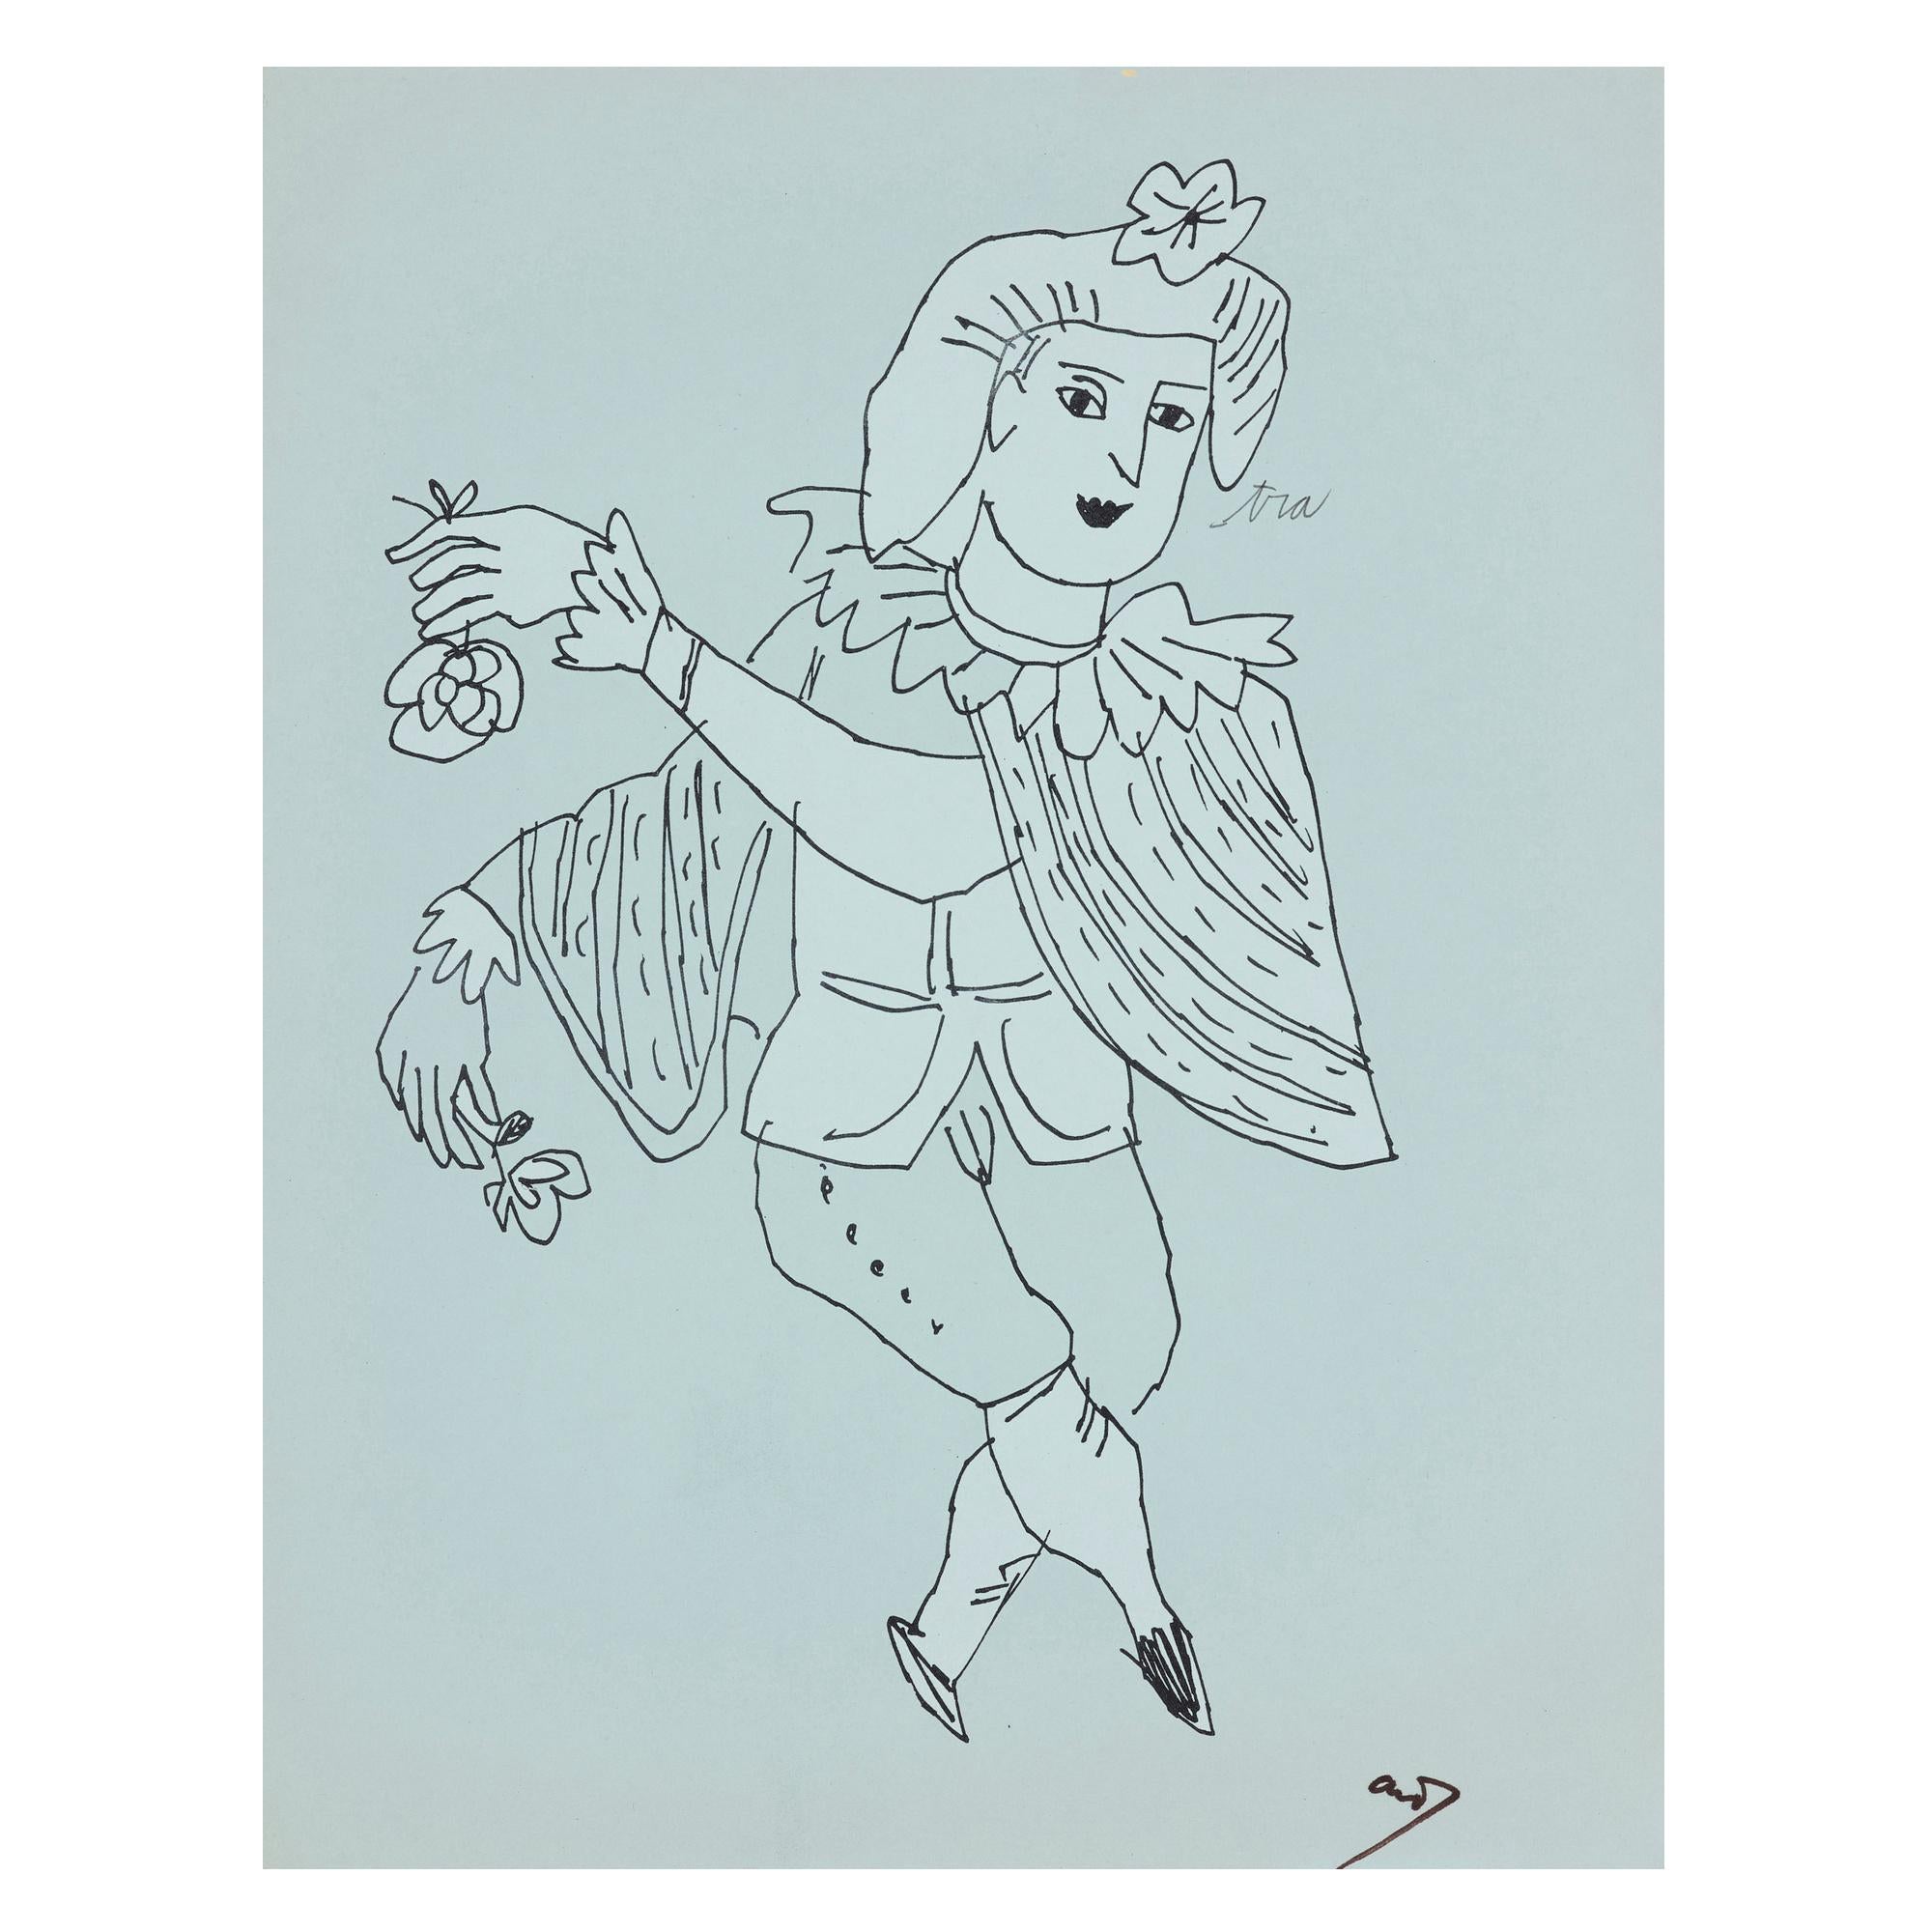 Andy Warhol lithograph from Love is a Pink Cake 1953:
Hand-signed 1950's Andy Warhol lithograph featuring a figure dancing with flowers. This individual work is from the portfolio 'Love is a Pink Cake' (originally a collection of 25 works printed on